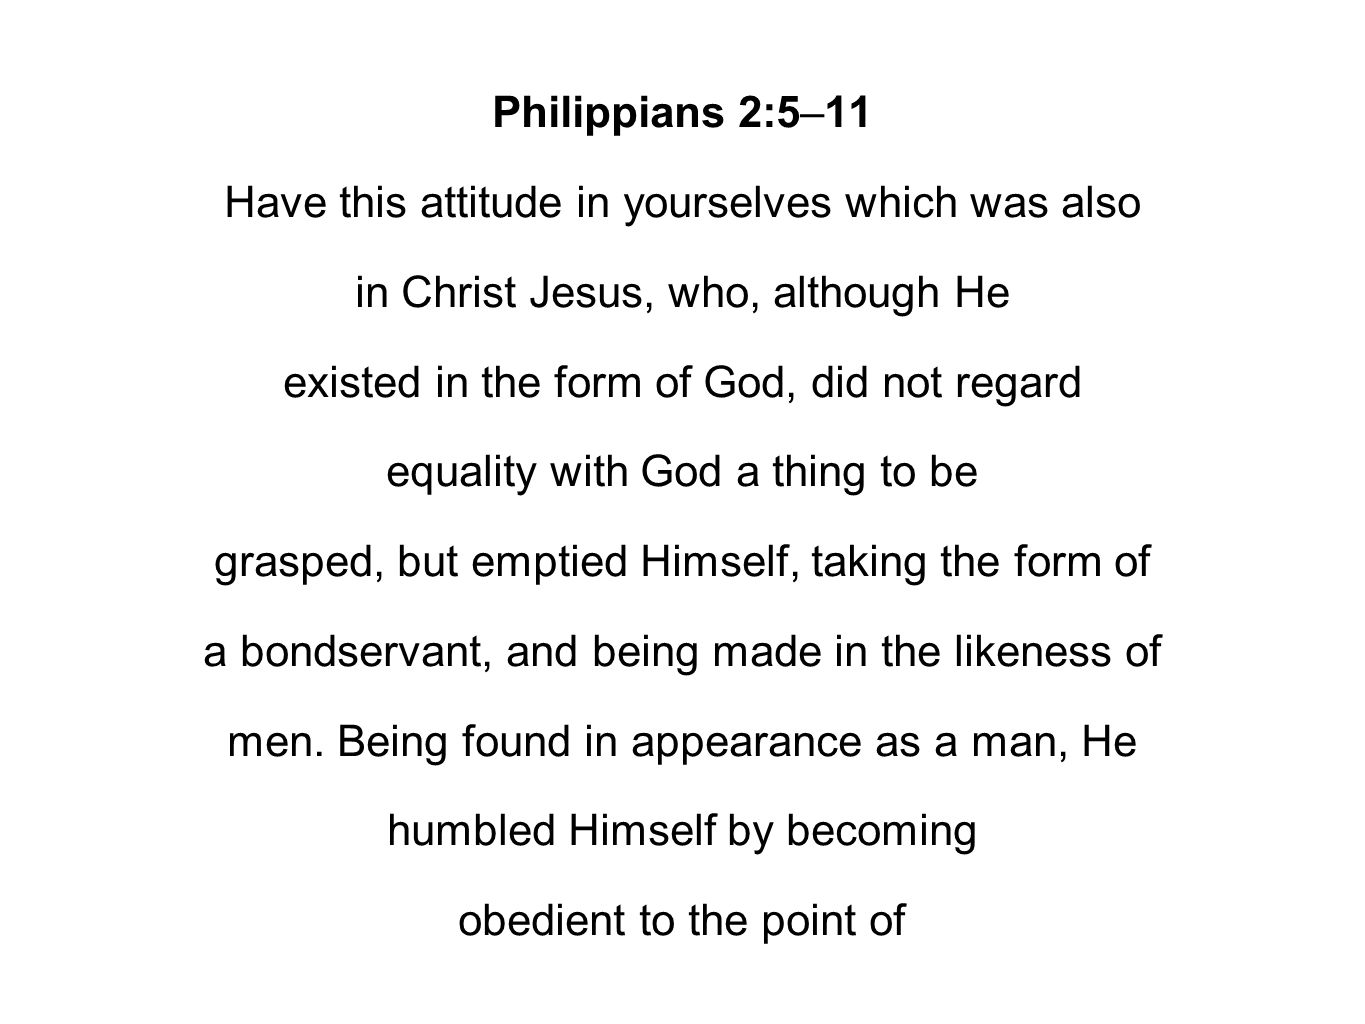 Philippians 2:5–11 Have this attitude in yourselves which was also in Christ Jesus, who, although He existed in the form of God, did not regard equality with God a thing to be grasped, but emptied Himself, taking the form of a bondservant, and being made in the likeness of men.